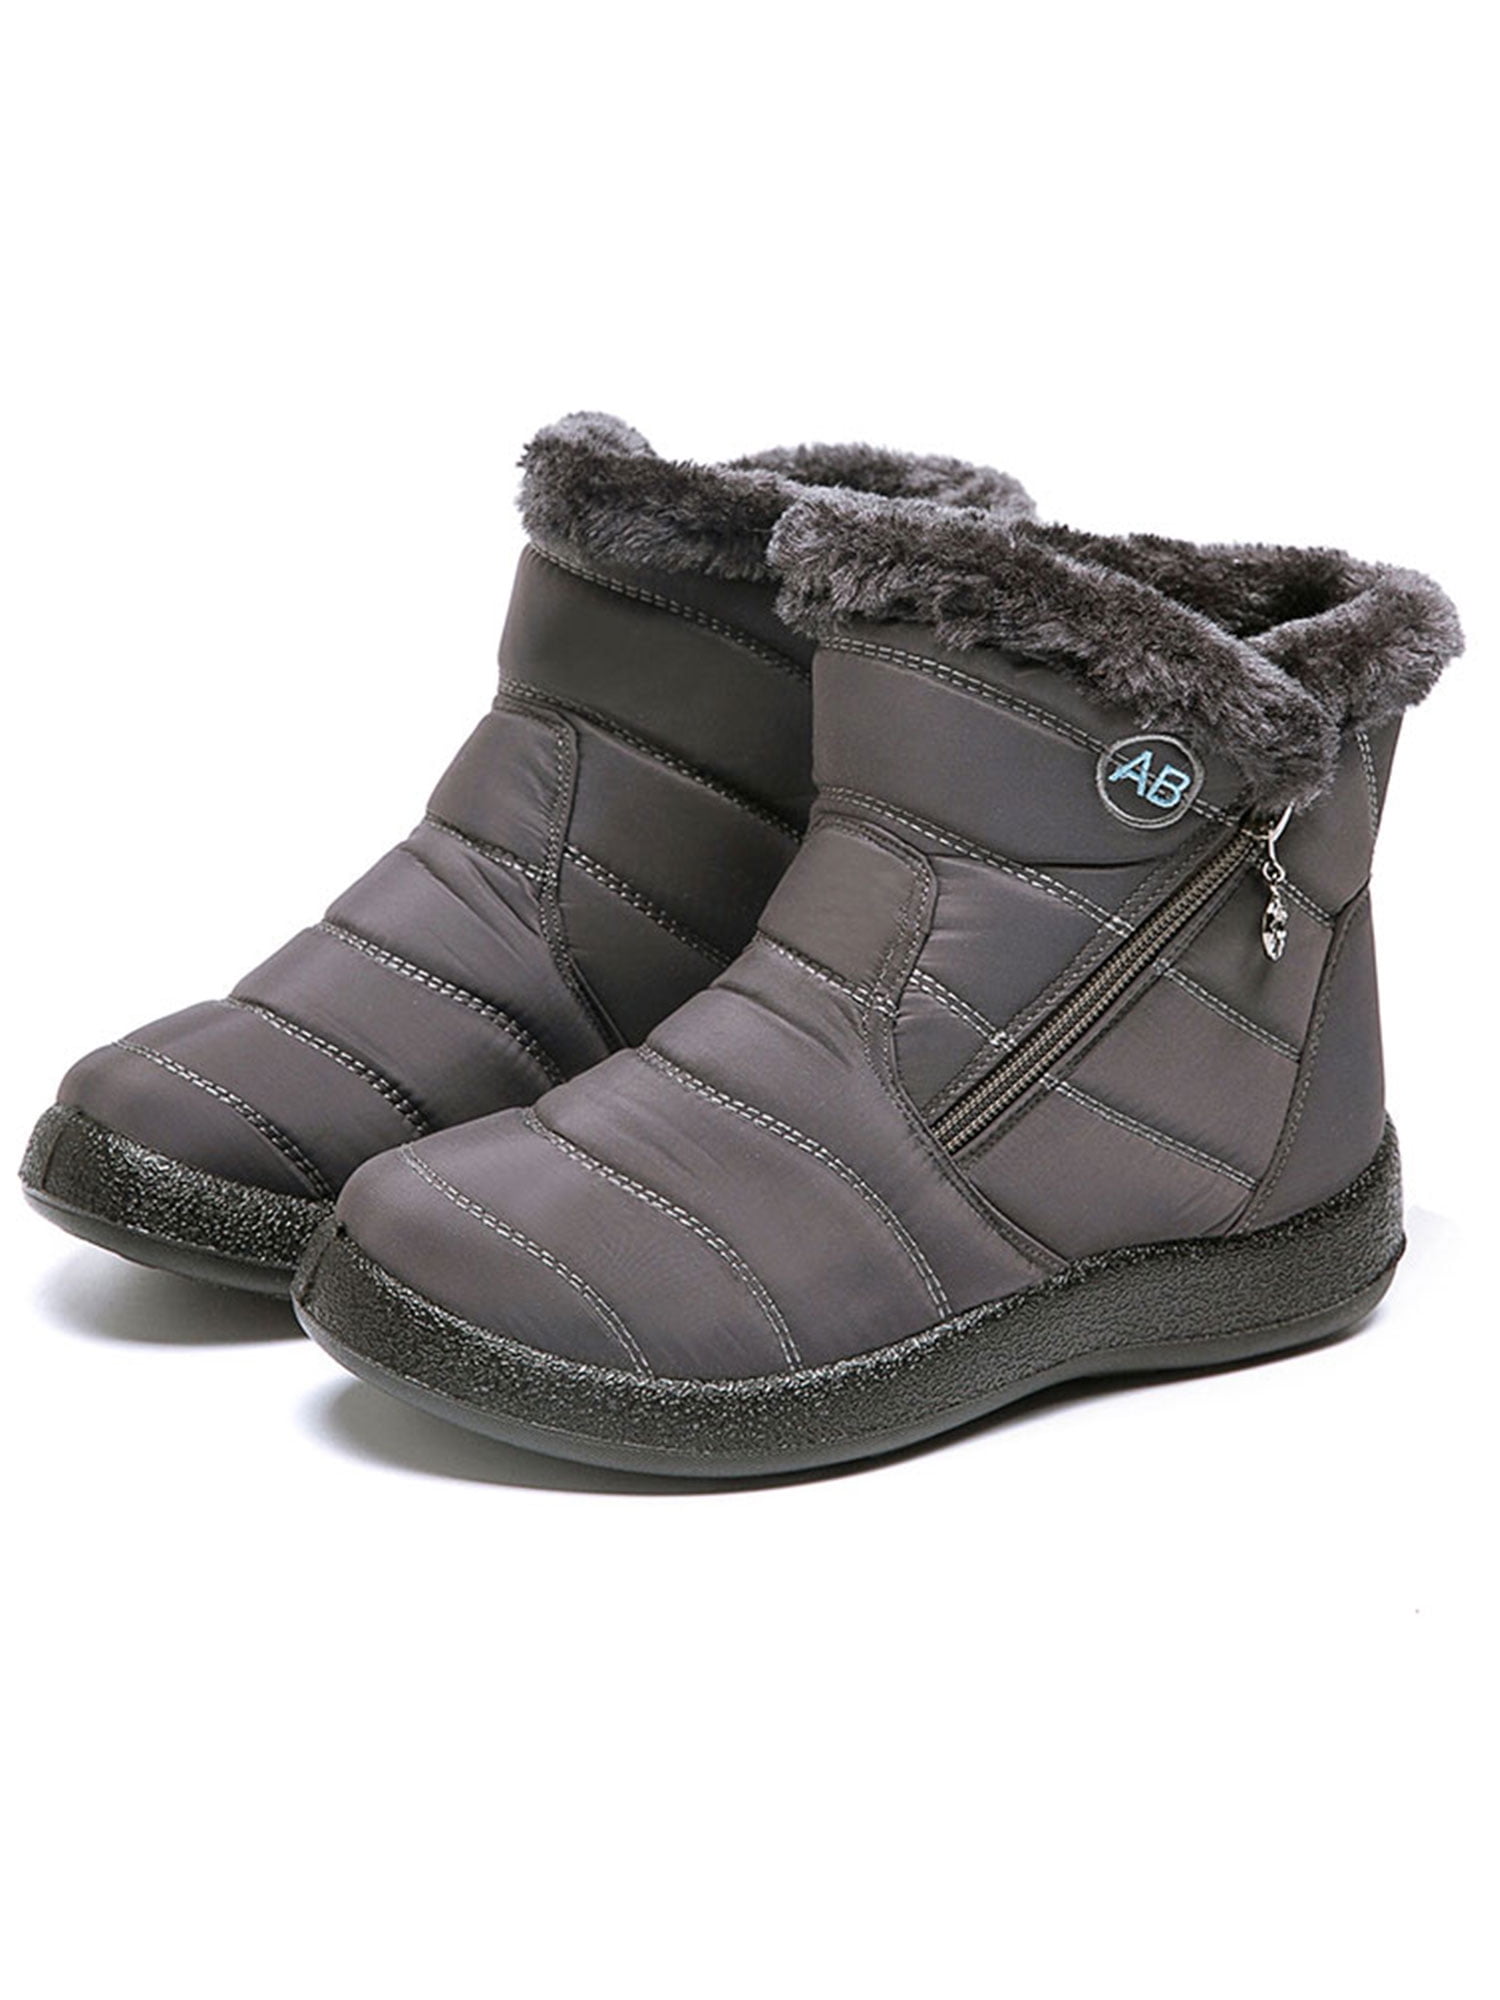 Details about   Winter Outdoor Warm Down Faux Leather Snow Boots Drawstring Slip-On Women Shoes 